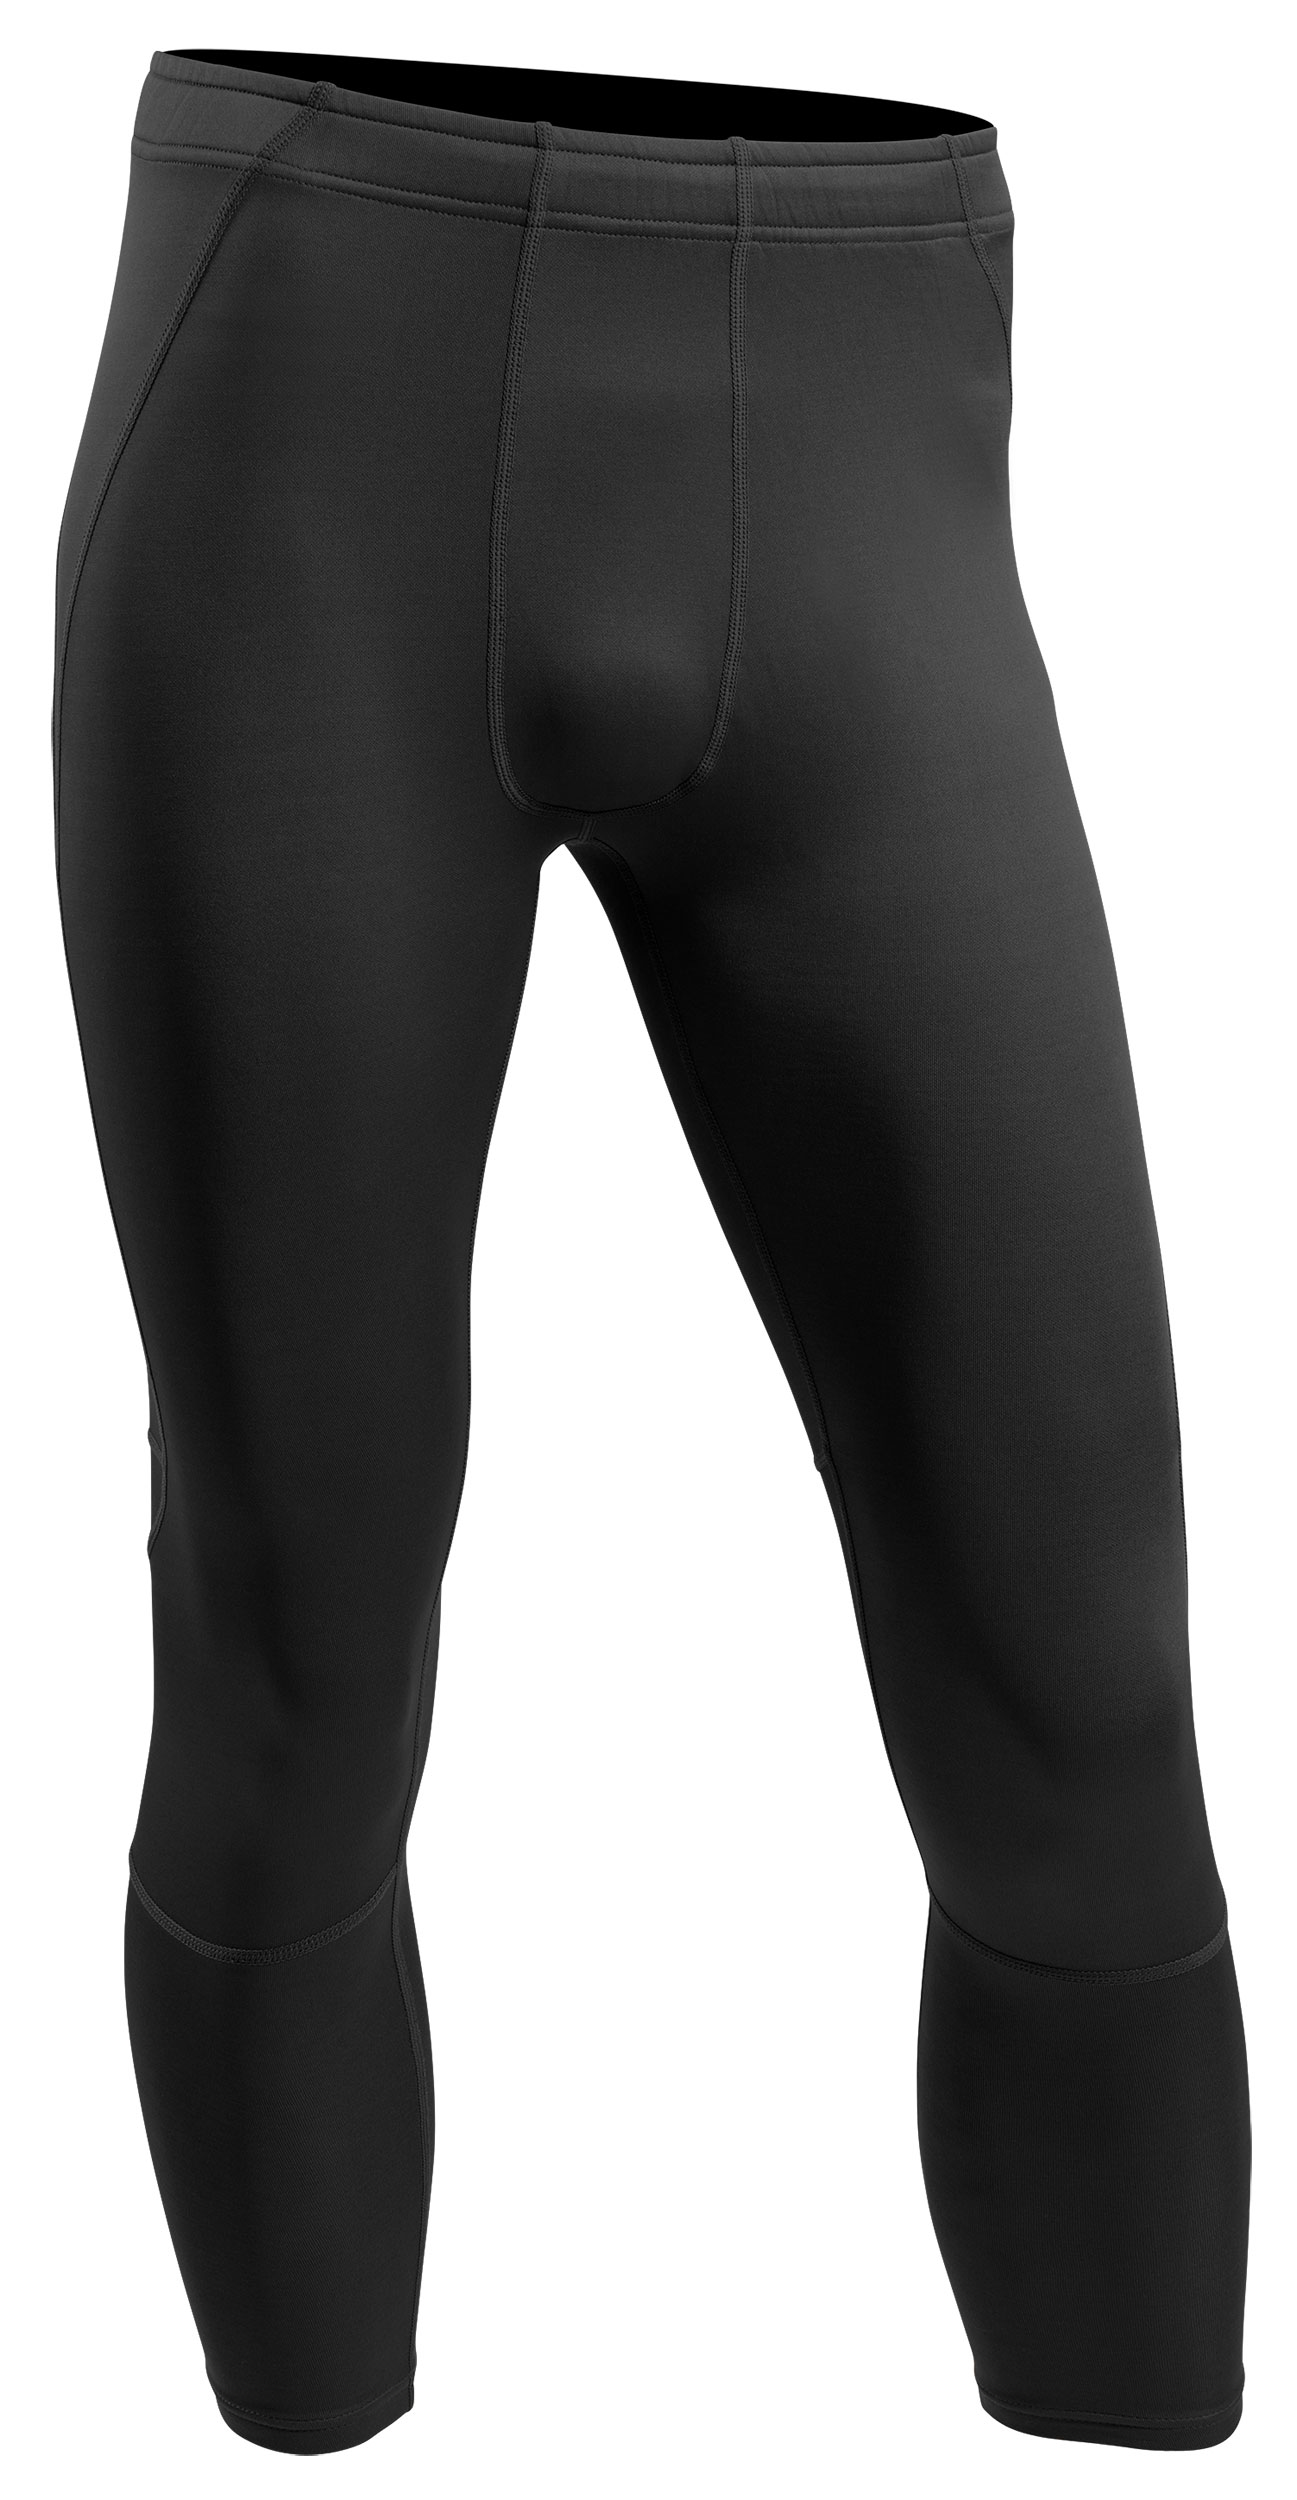 Collants Thermo Performer A10 - niveau 3